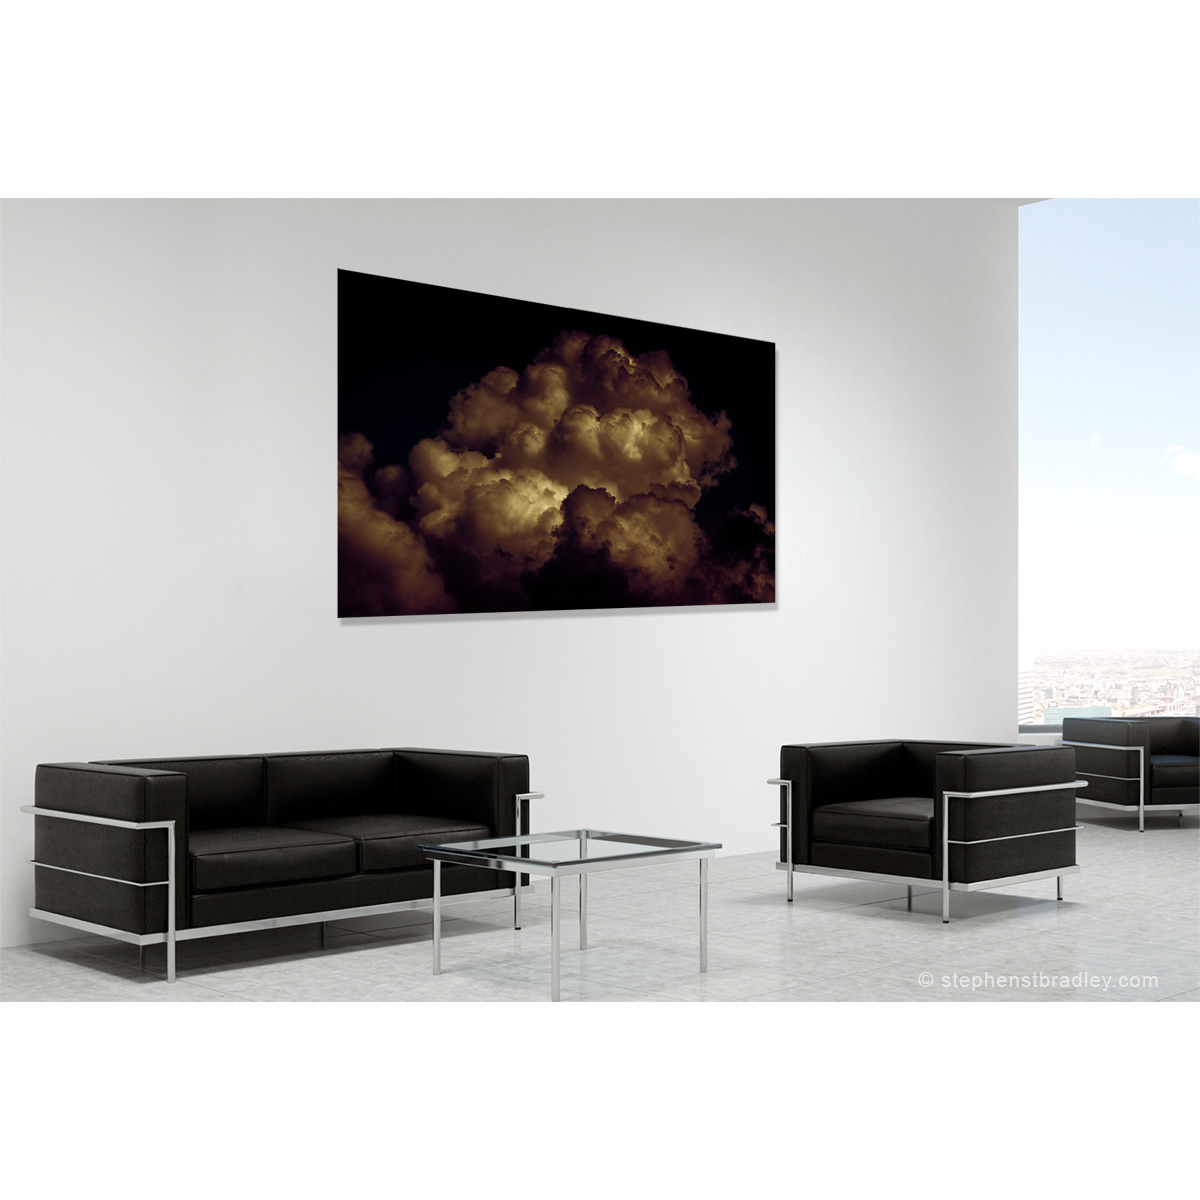 Fine art landscape photograph in a room setting - photo reference 6295.